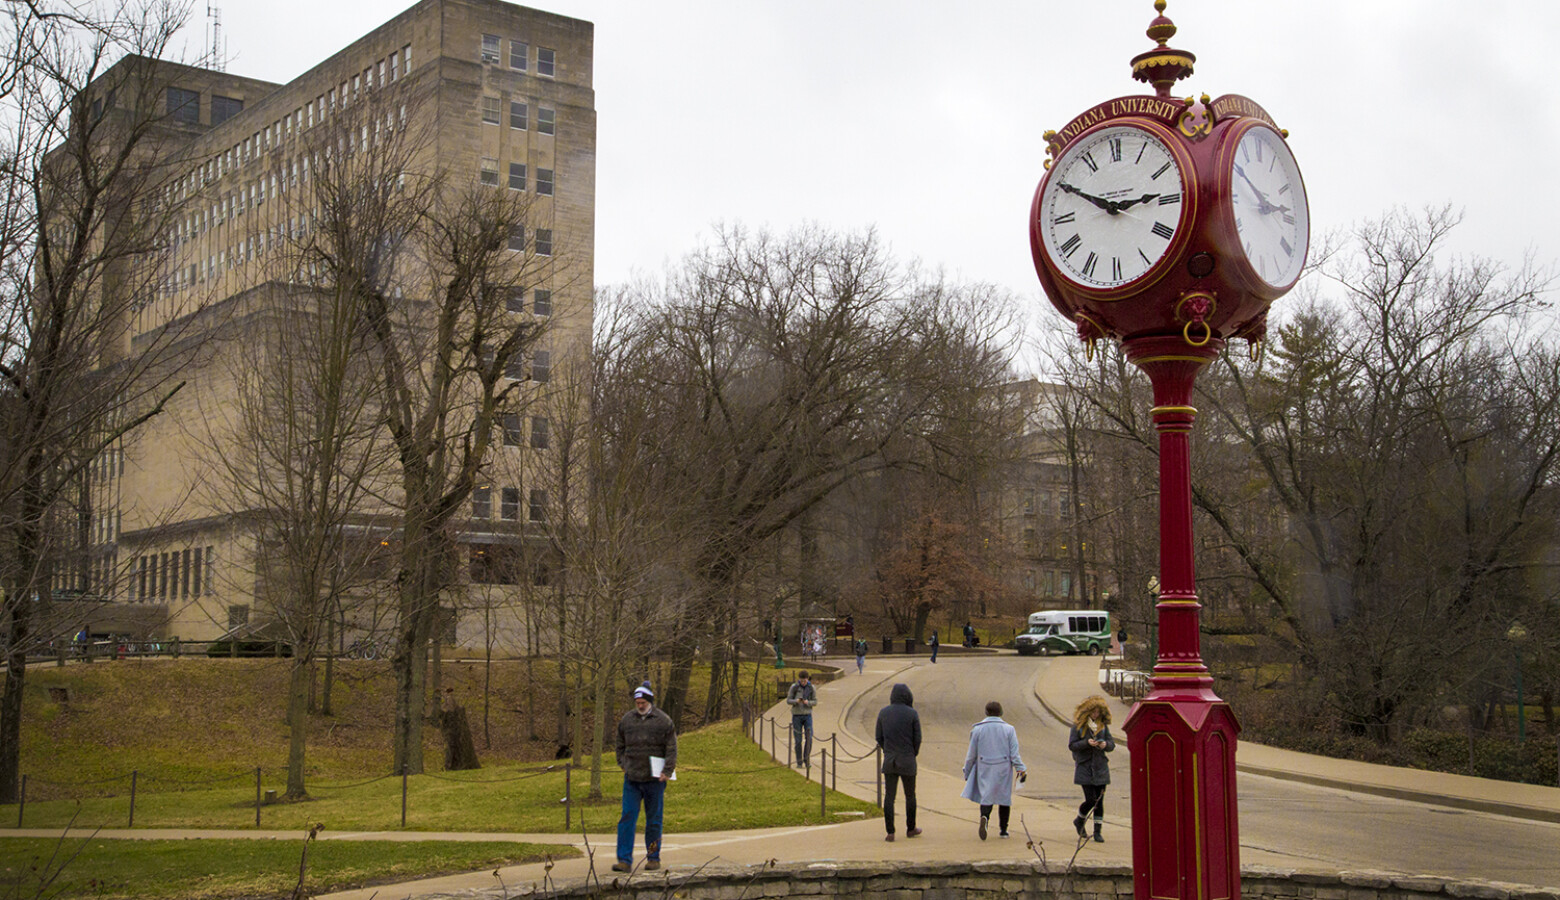 Indiana University announced recently that all students, faculty and staff must be vaccinated against COVID-19 for the fall term, with limited religious and medical exemptions. (Peter Balonon-Rosen/IPB News)